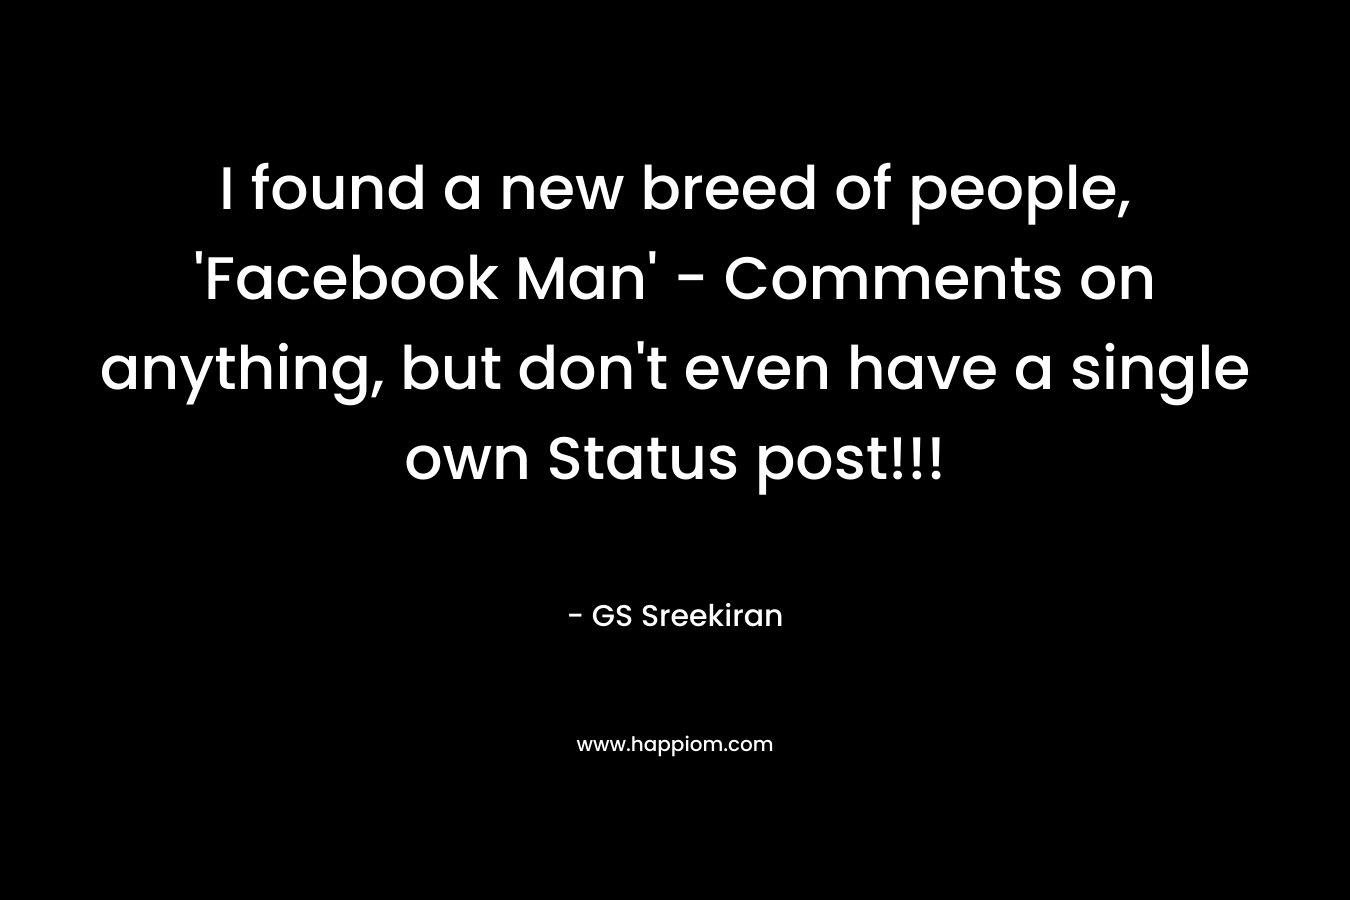 I found a new breed of people, 'Facebook Man' - Comments on anything, but don't even have a single own Status post!!!